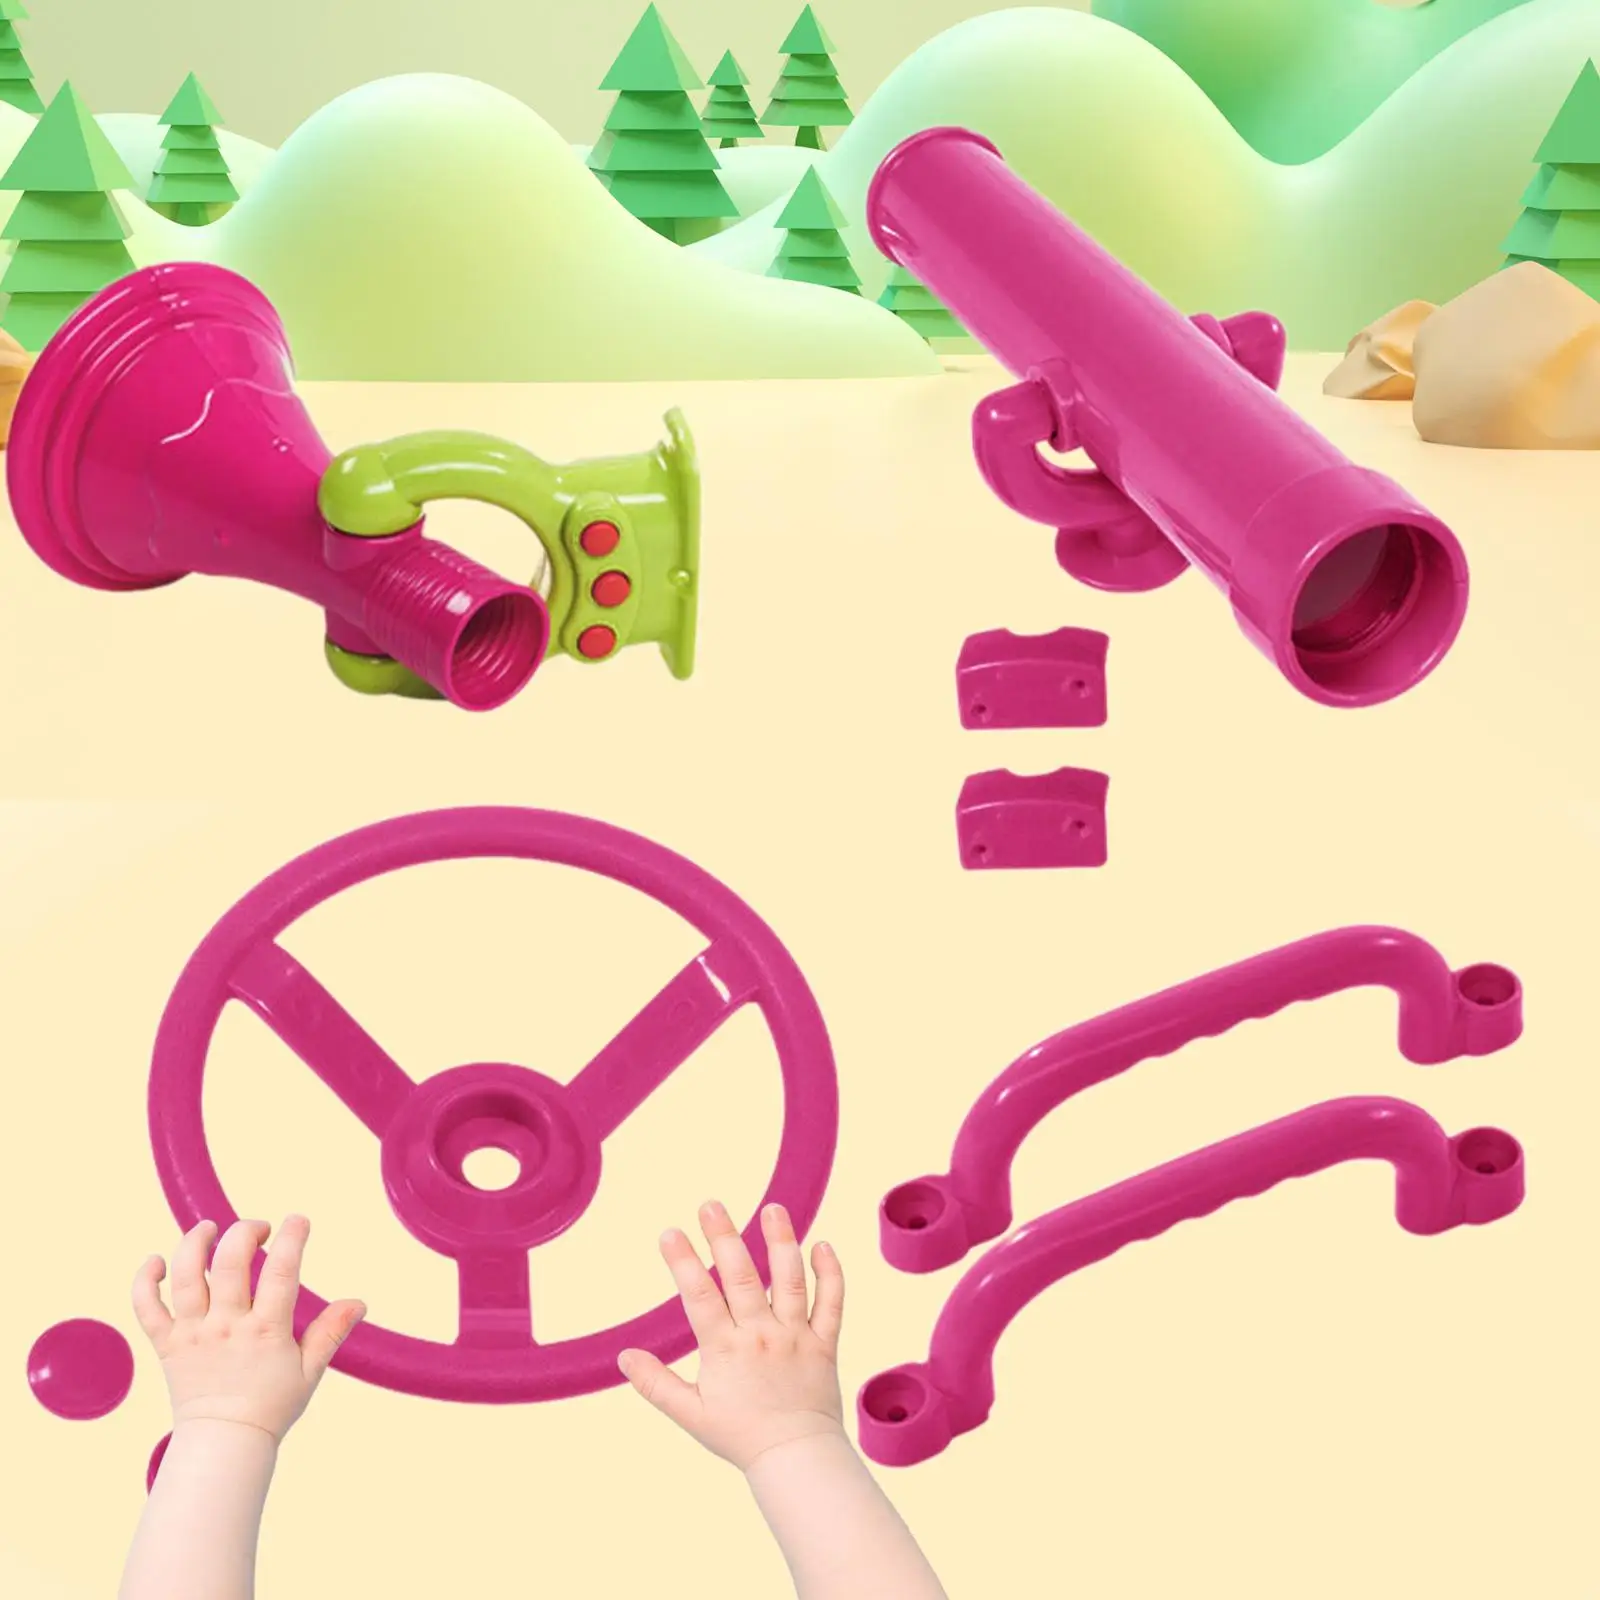 4Pcs Playground Accessories Pink Trumpet Swingset Attachments for Outdoor Playhouse Treehouse Swingset Backyard Ages 3 Older